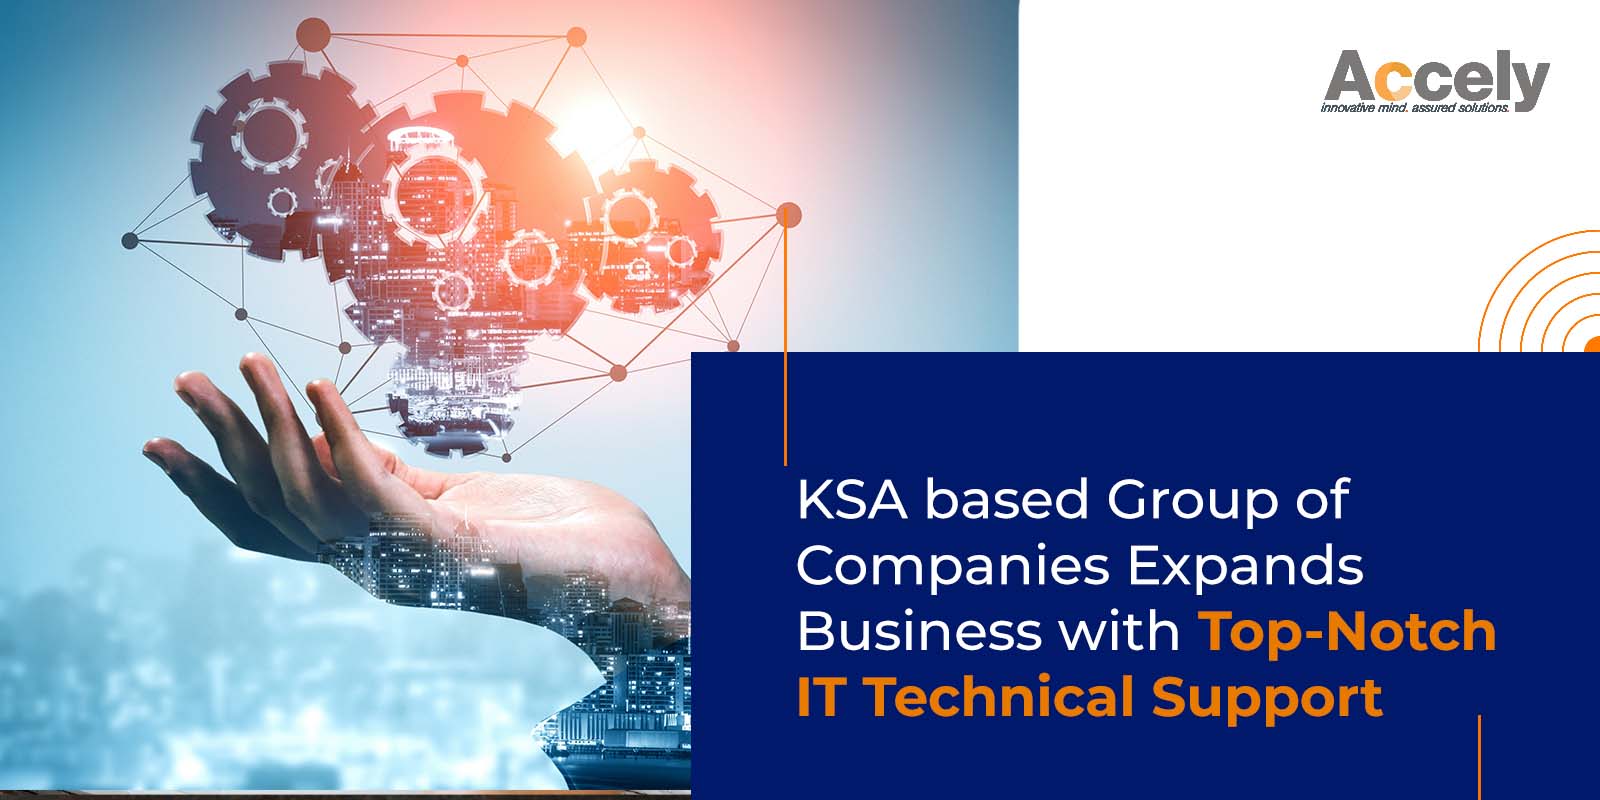 KSA Based Group of Companies Expands Business with Top-Notch IT Technical Support